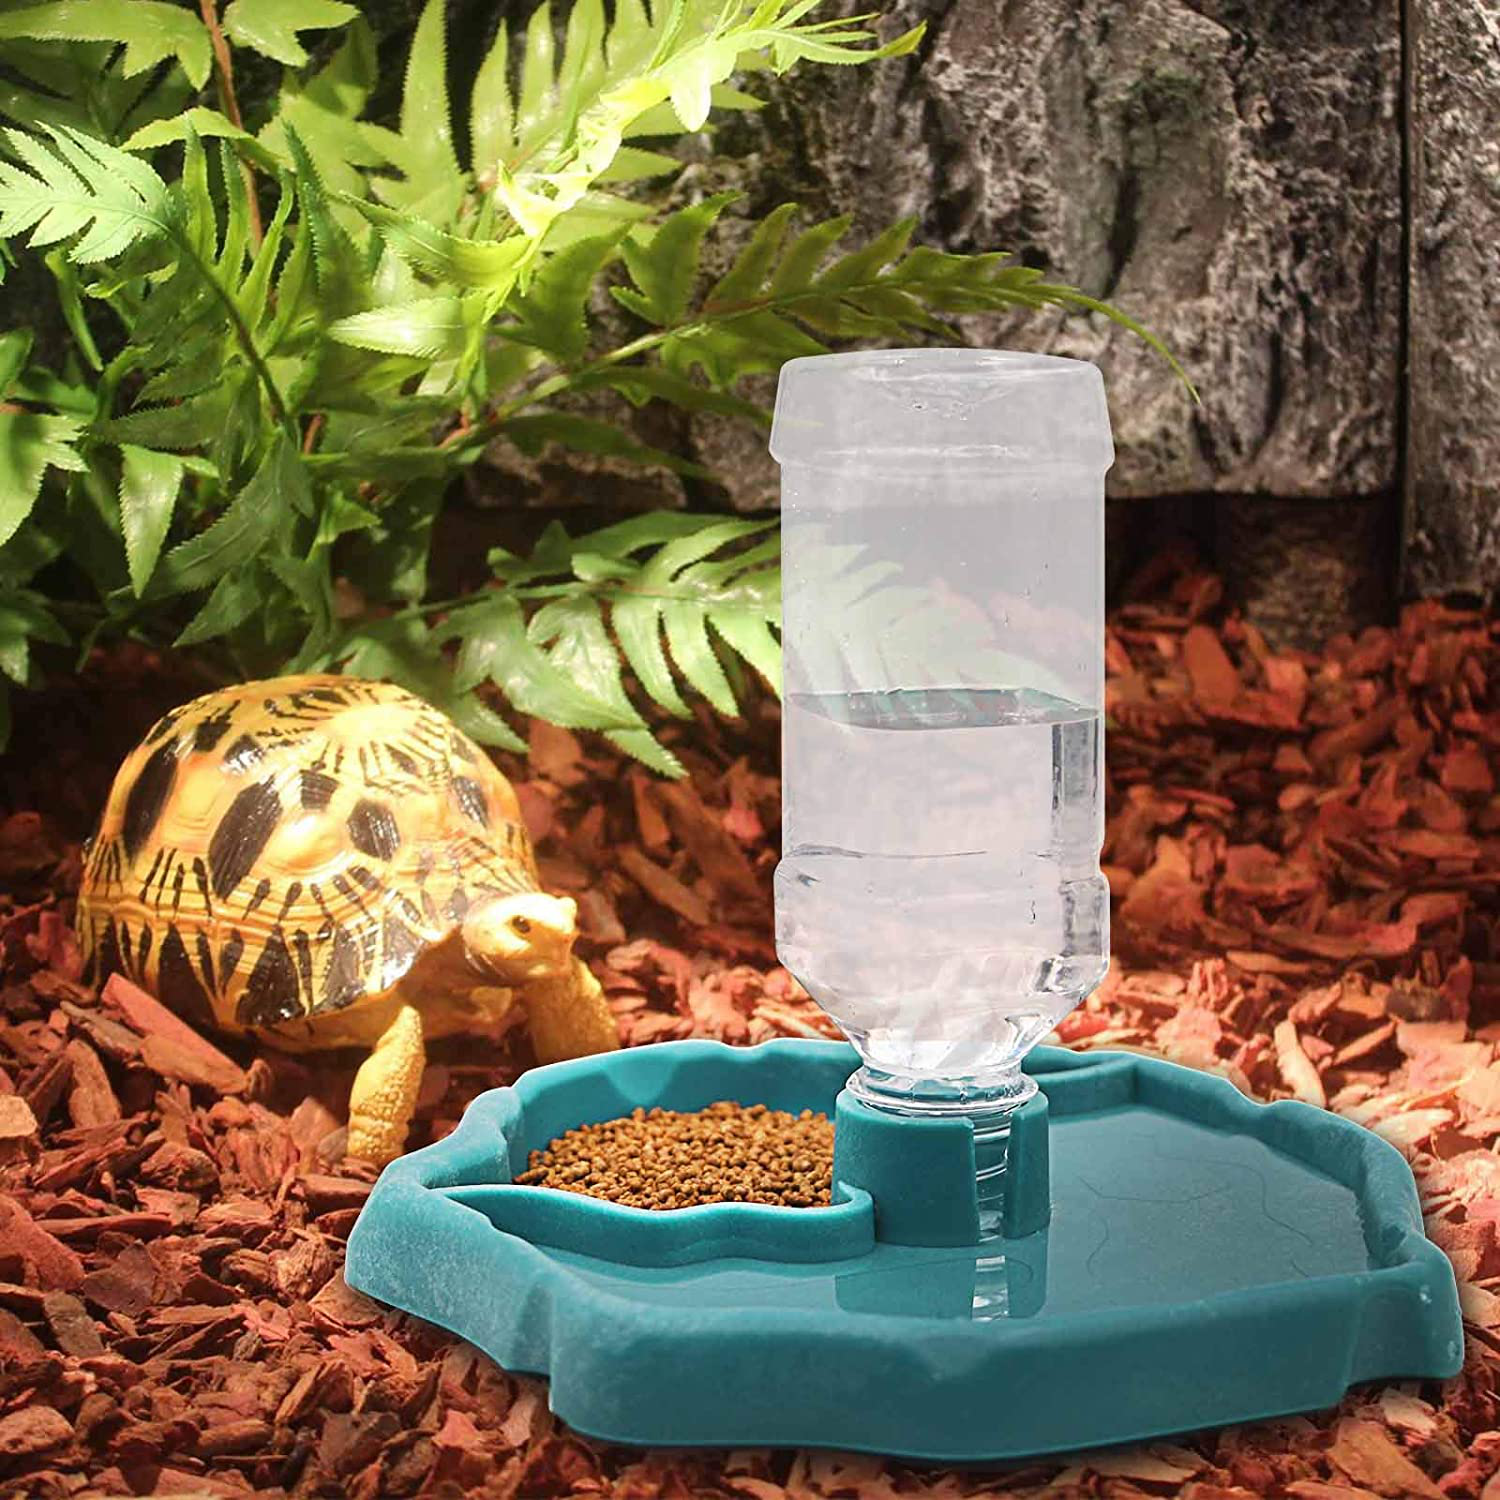 MACGOAL Automatic Reptile Feeder Reptile Food and Water Dish Bowl Reptile Water Dish with Bottle Tortoise Turtle Water Dispenser for Bearded Dragon Gecko Lizard (Blue)